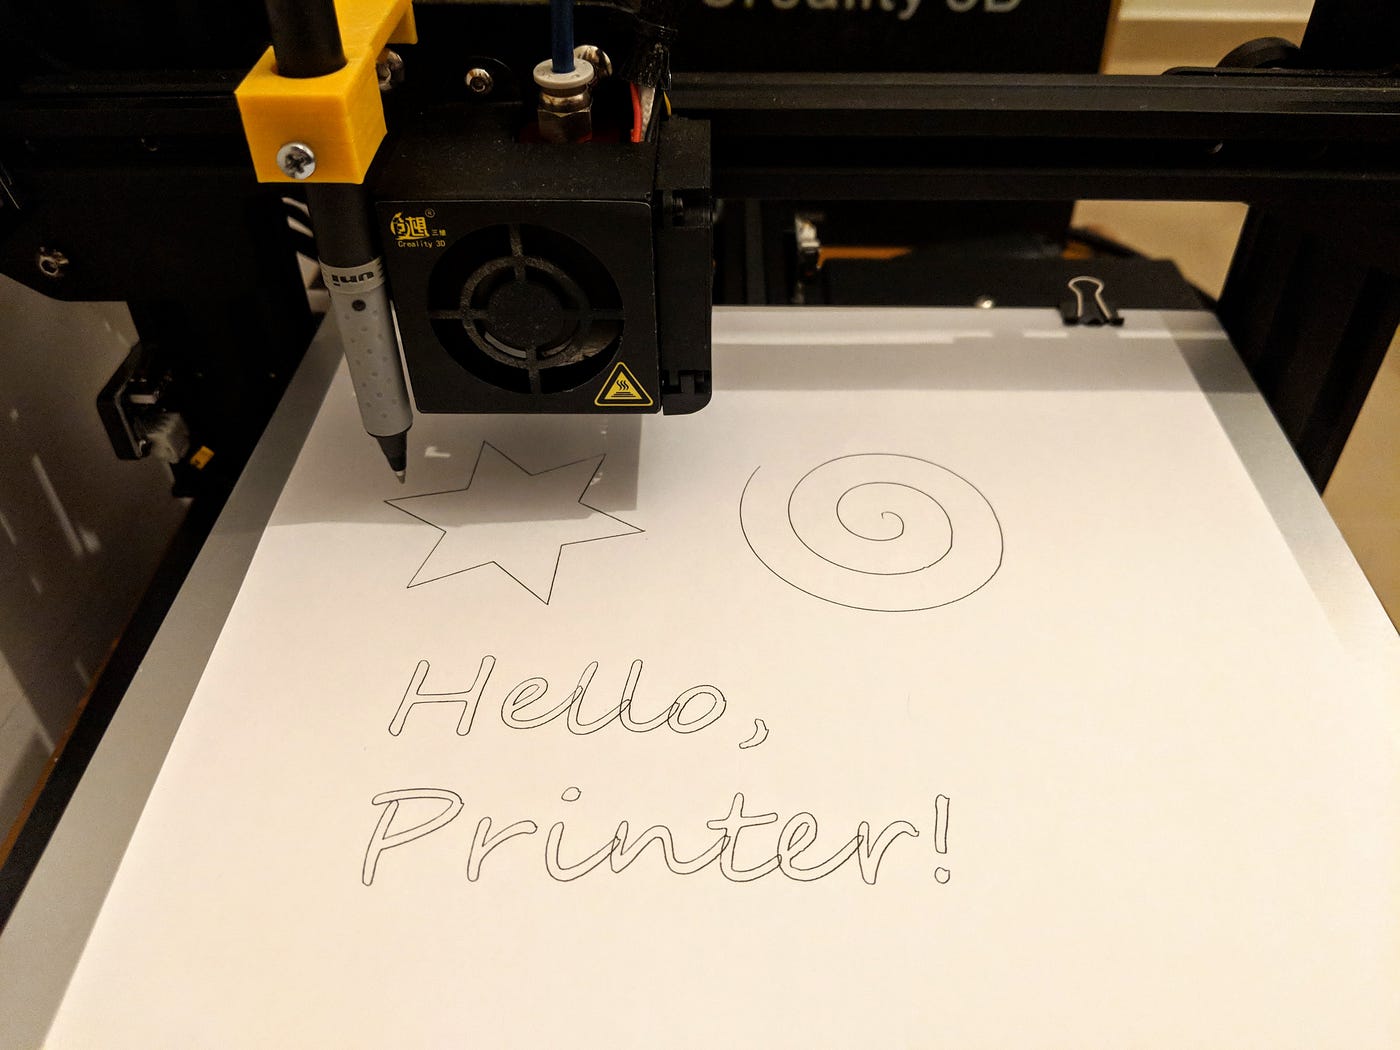 How to Turn Your 3D Printer into a Plotter in One Hour | by Uri Shaked |  Medium